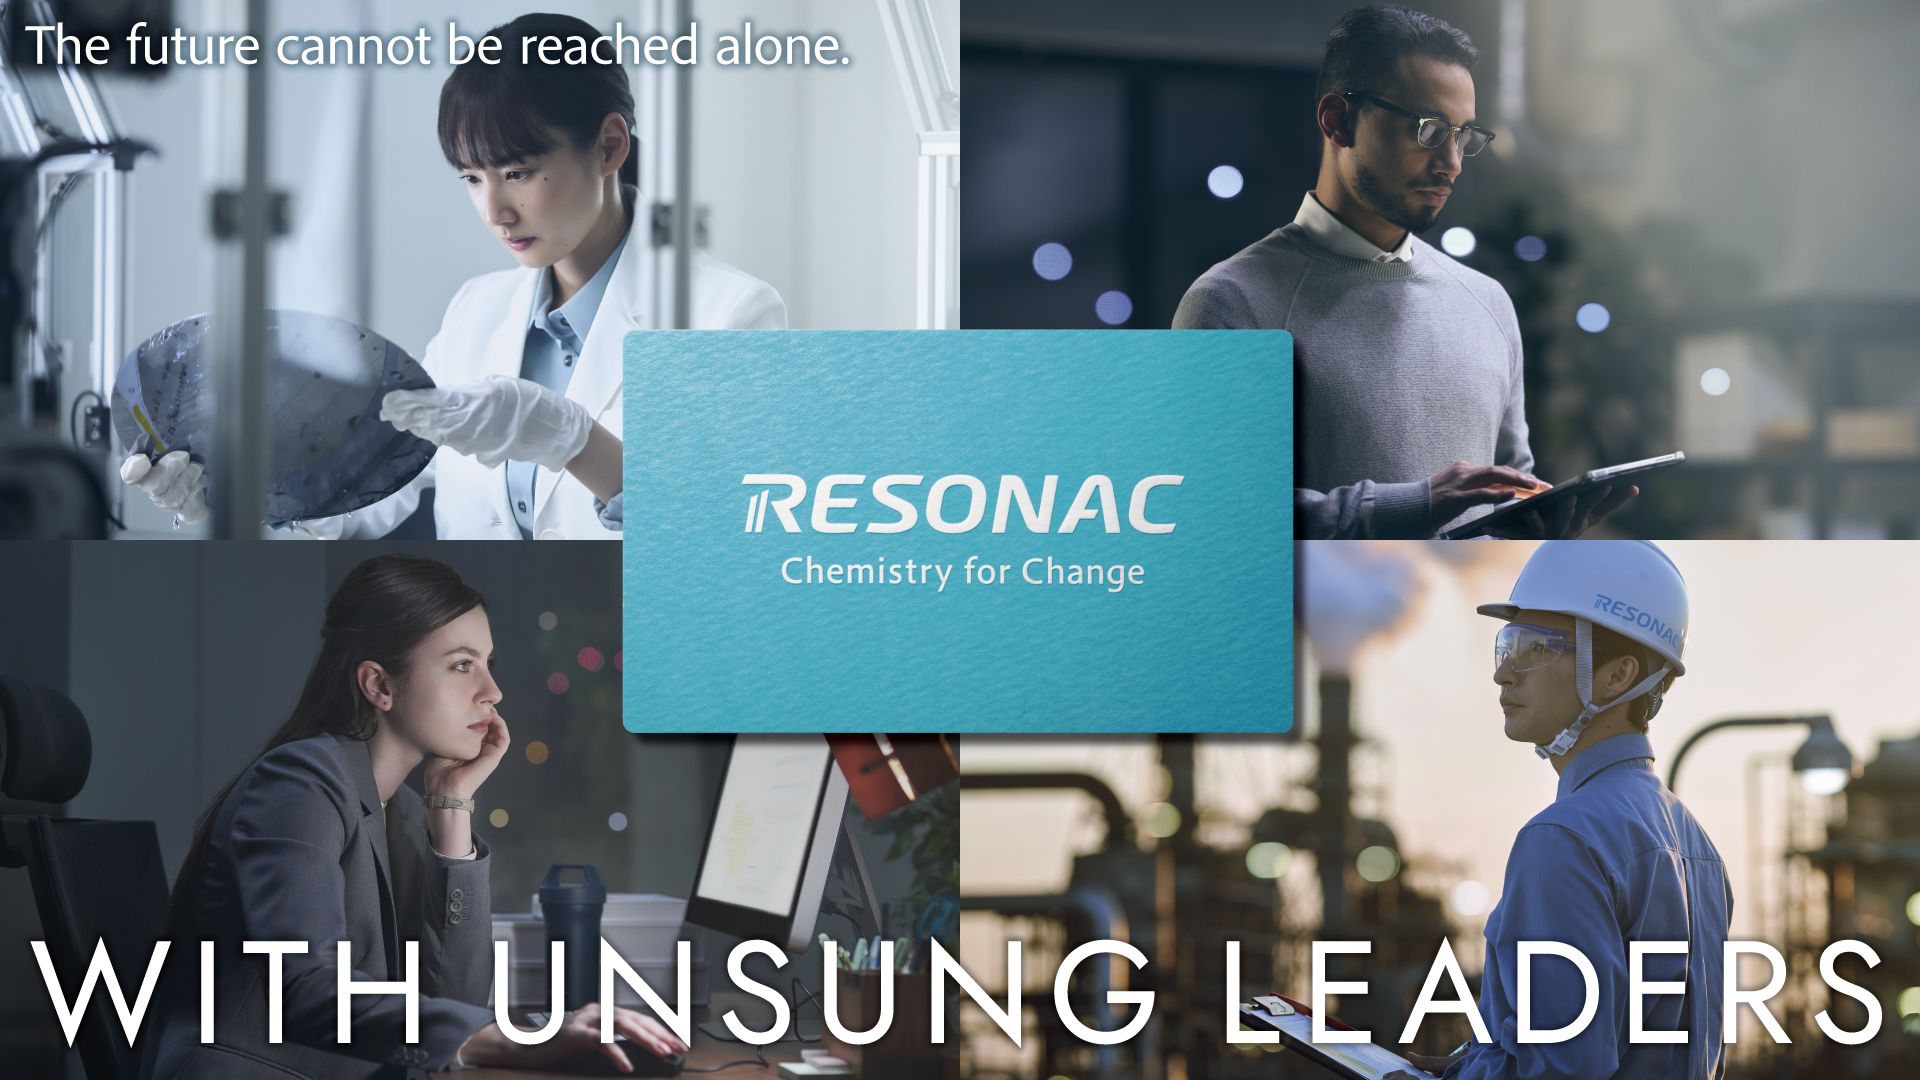 RESONAC Chemistry for Change The future cannot be reached alone. WITH UNSUNG LEADERS